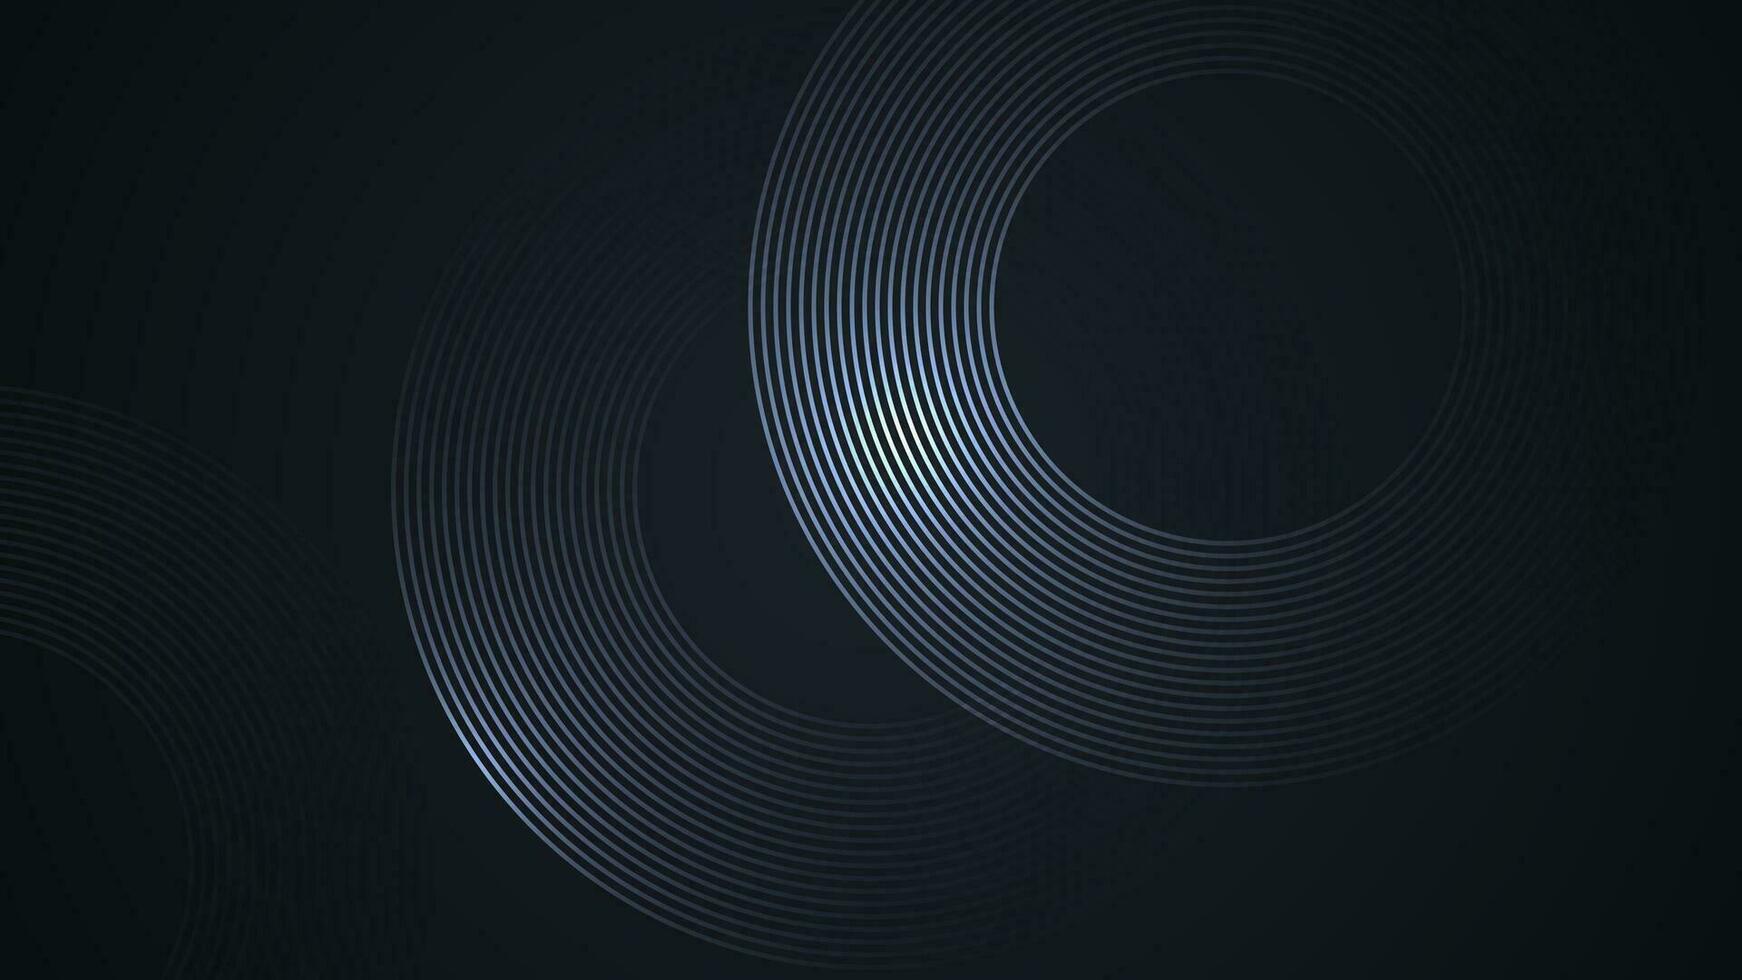 Black simple abstract background with lines in a curved style geometric style as the main element. vector